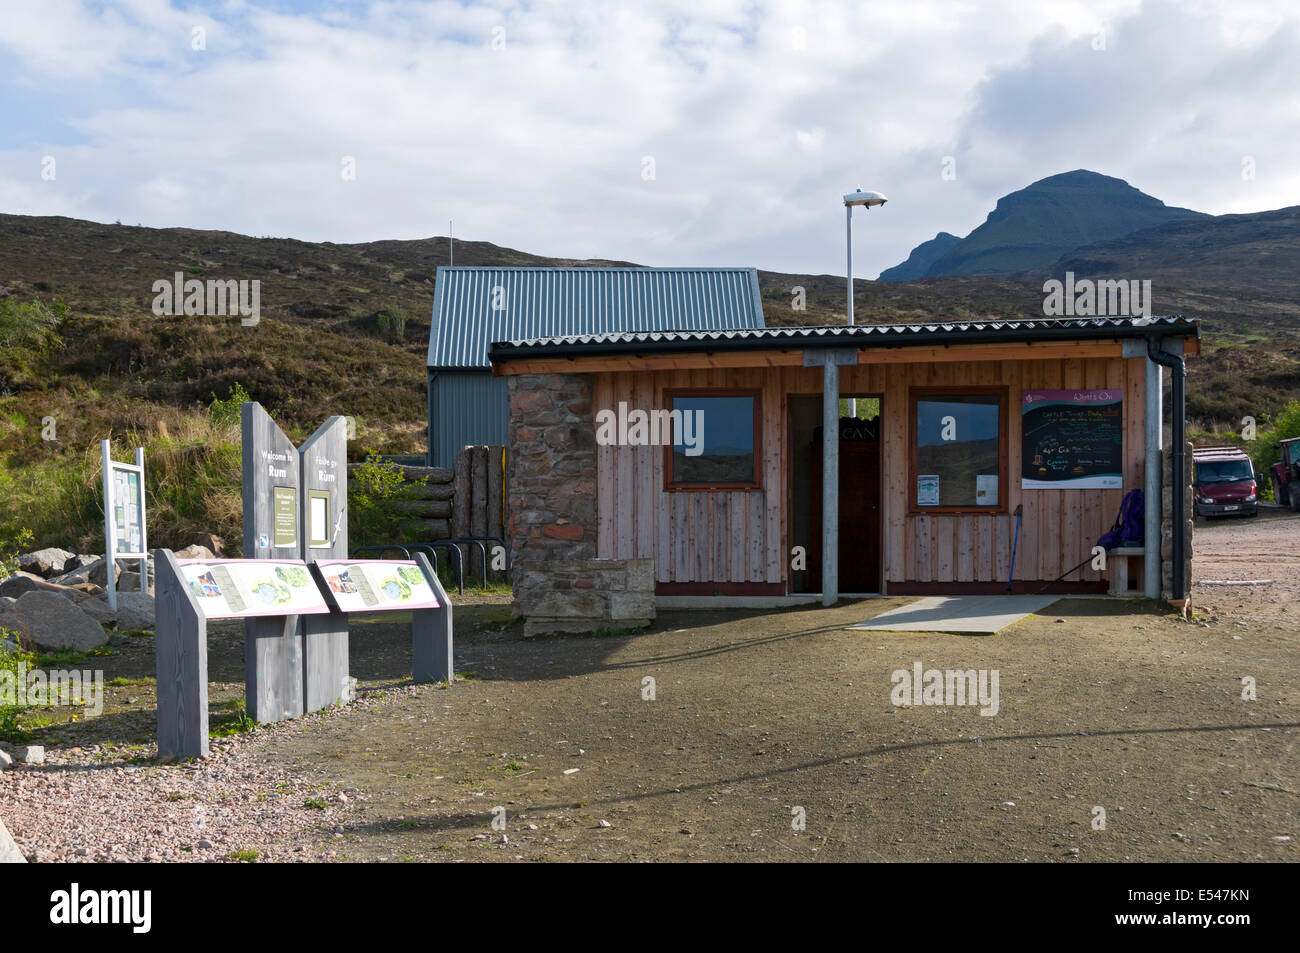 Waiting room with tourist information displays in English and Gaelic at the ferry terminal, Kinloch, Isle of Rum, Scotland, UK Stock Photo